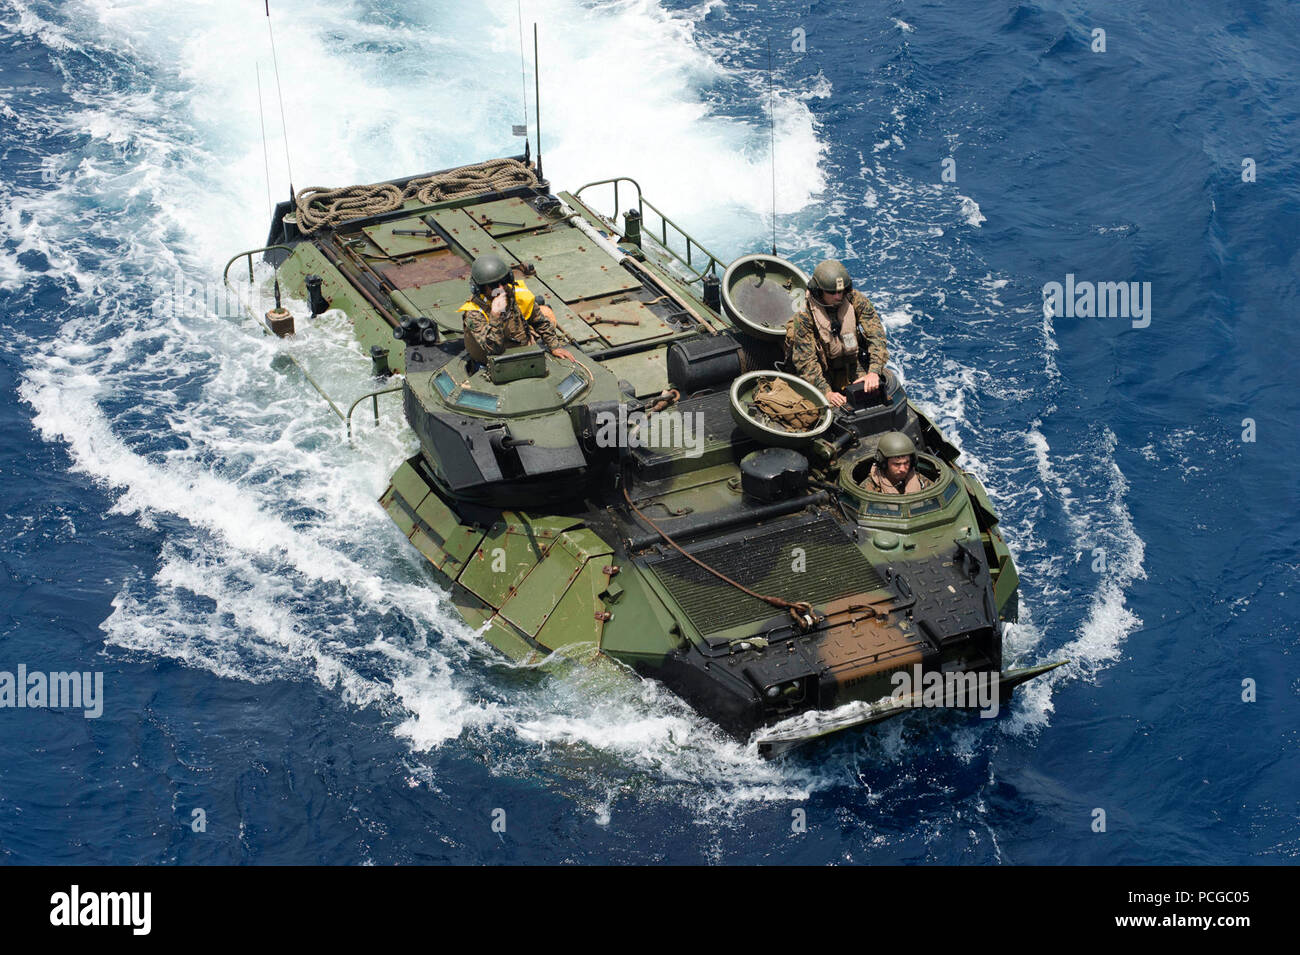 An amphibious assault vehicle, assigned to the 31st Marine Expeditionary Unit (MEU), prepares to embark the well deck of the amphibious dock landing ship USS Germantown (LSD 42) during the Amphibious Landing Exercise 2015 (PHIBLEX15). PHIBLEX15 is an annual bilateral training exercise conducted with the Armed Forces of the Philippines. Germantown is part of the Peleliu Expeditionary Strike Group, commanded by Rear Adm. Hugh Wetherald, and is conducting joint forces exercises in the U.S. 7th Fleet area of responsibility. Stock Photo